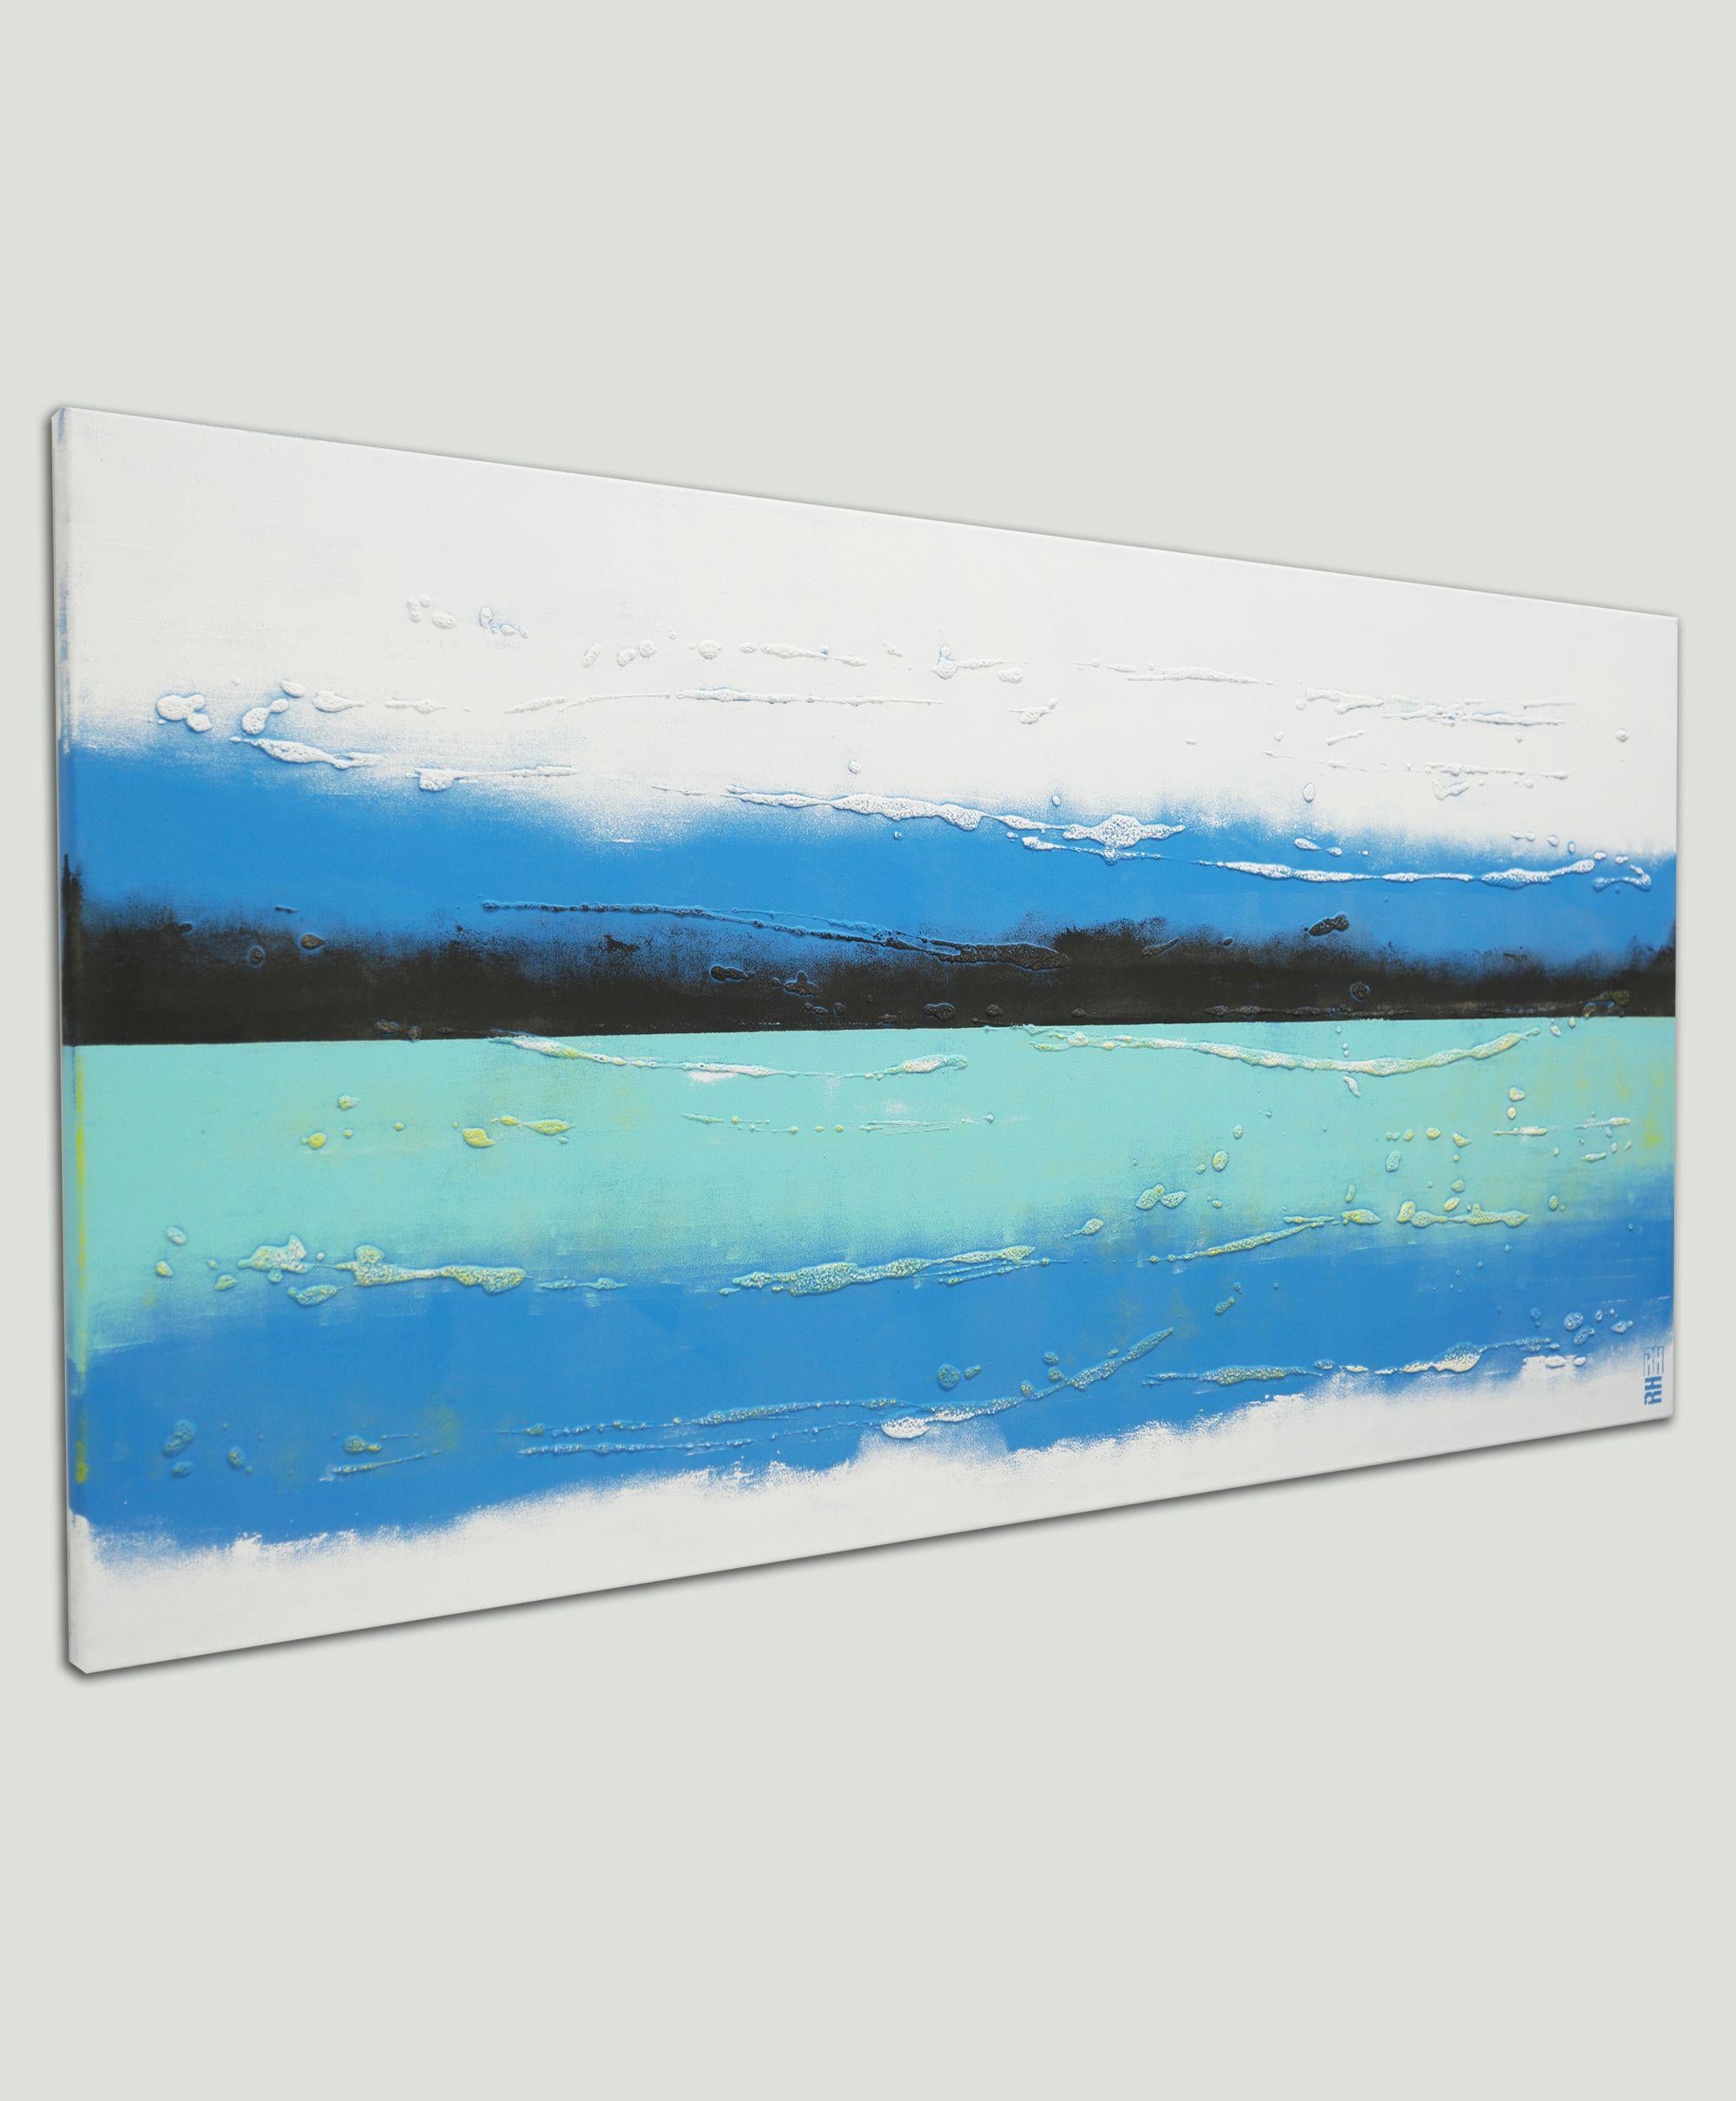 Acrylic Abstract Painting, Original artwork created by Ronald Hunter.    Layer upon layer of acrylic paint are applied in firm brush strokes, creating waves of intense vibrant colors. This minimalist piece brings tranquility in the room, and will